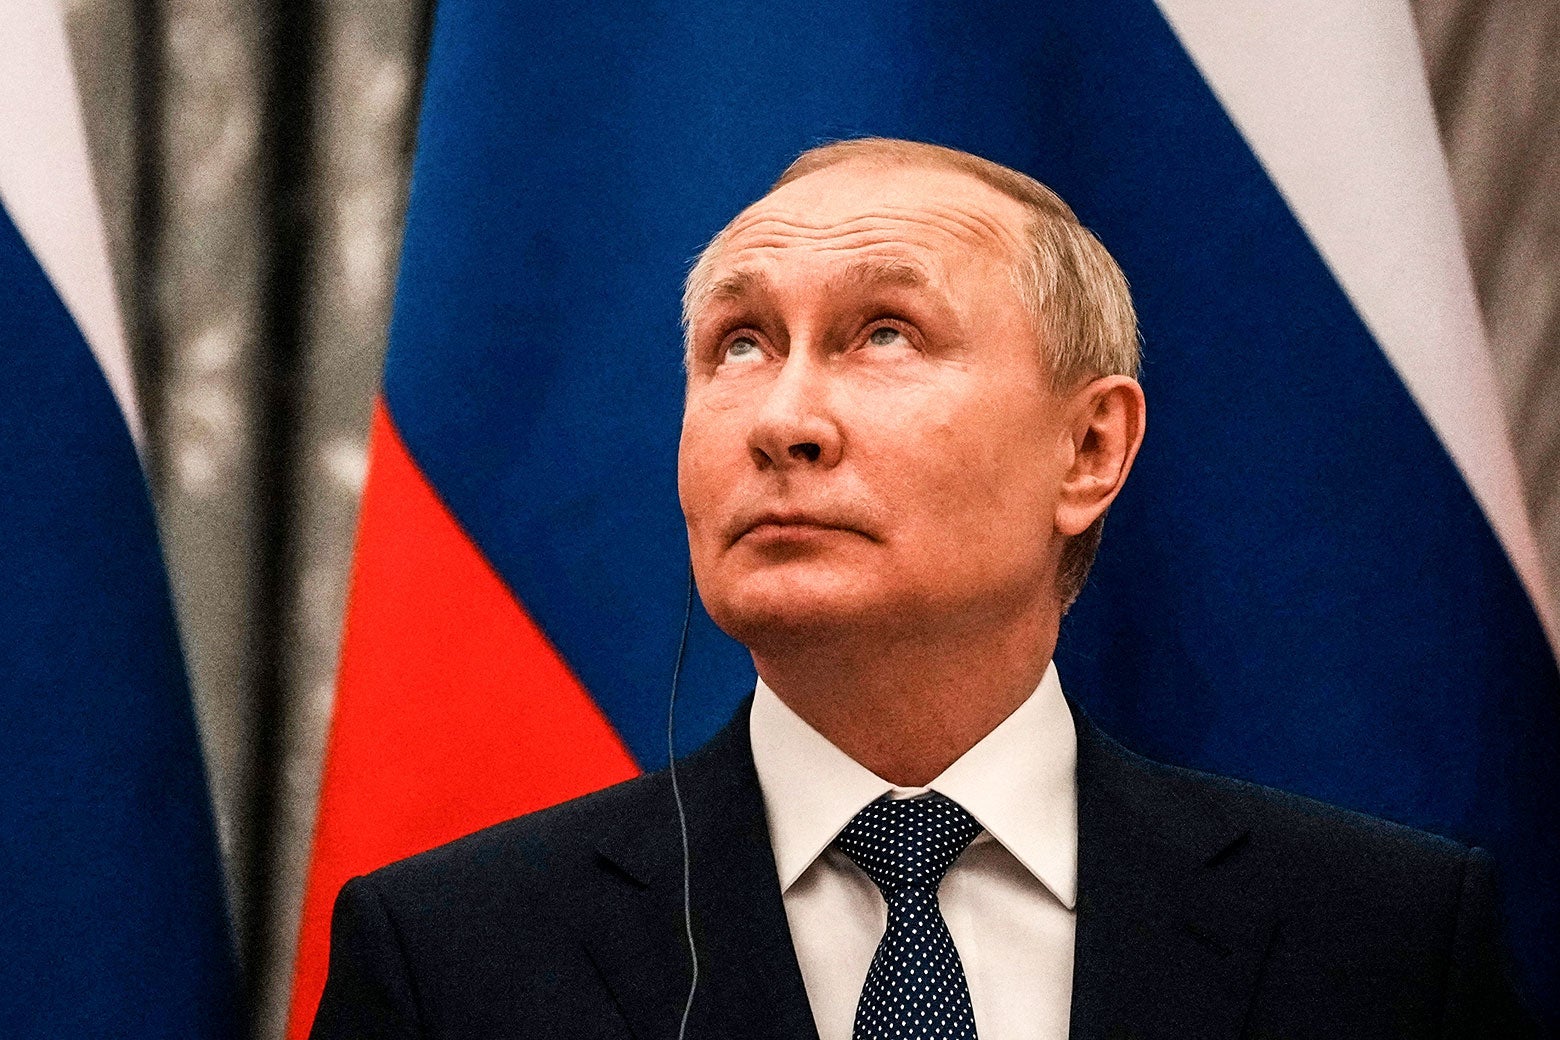 Vladimir Putin looks upward while standing in front of a Russian flag.